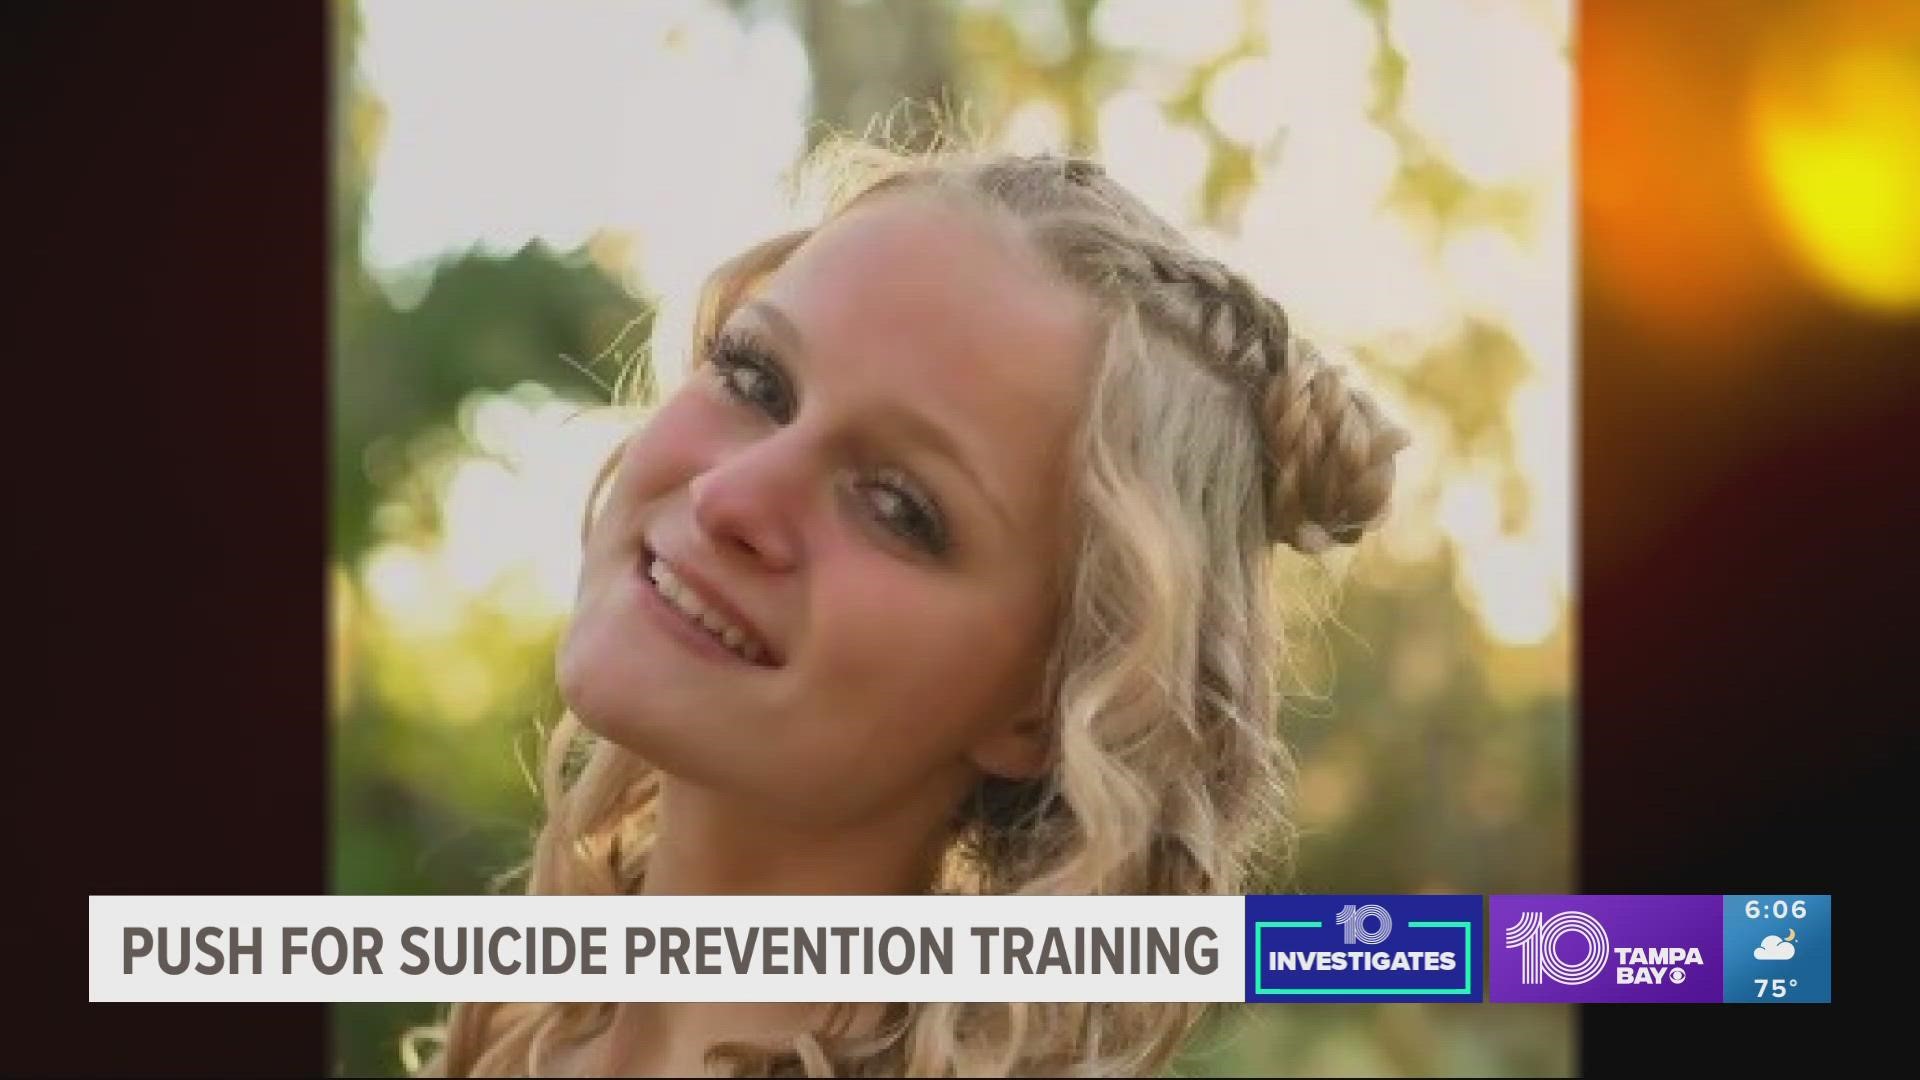 10 Investigates looks at the increase of suicides among young people and the push to bring more training for suicide prevention into our schools.